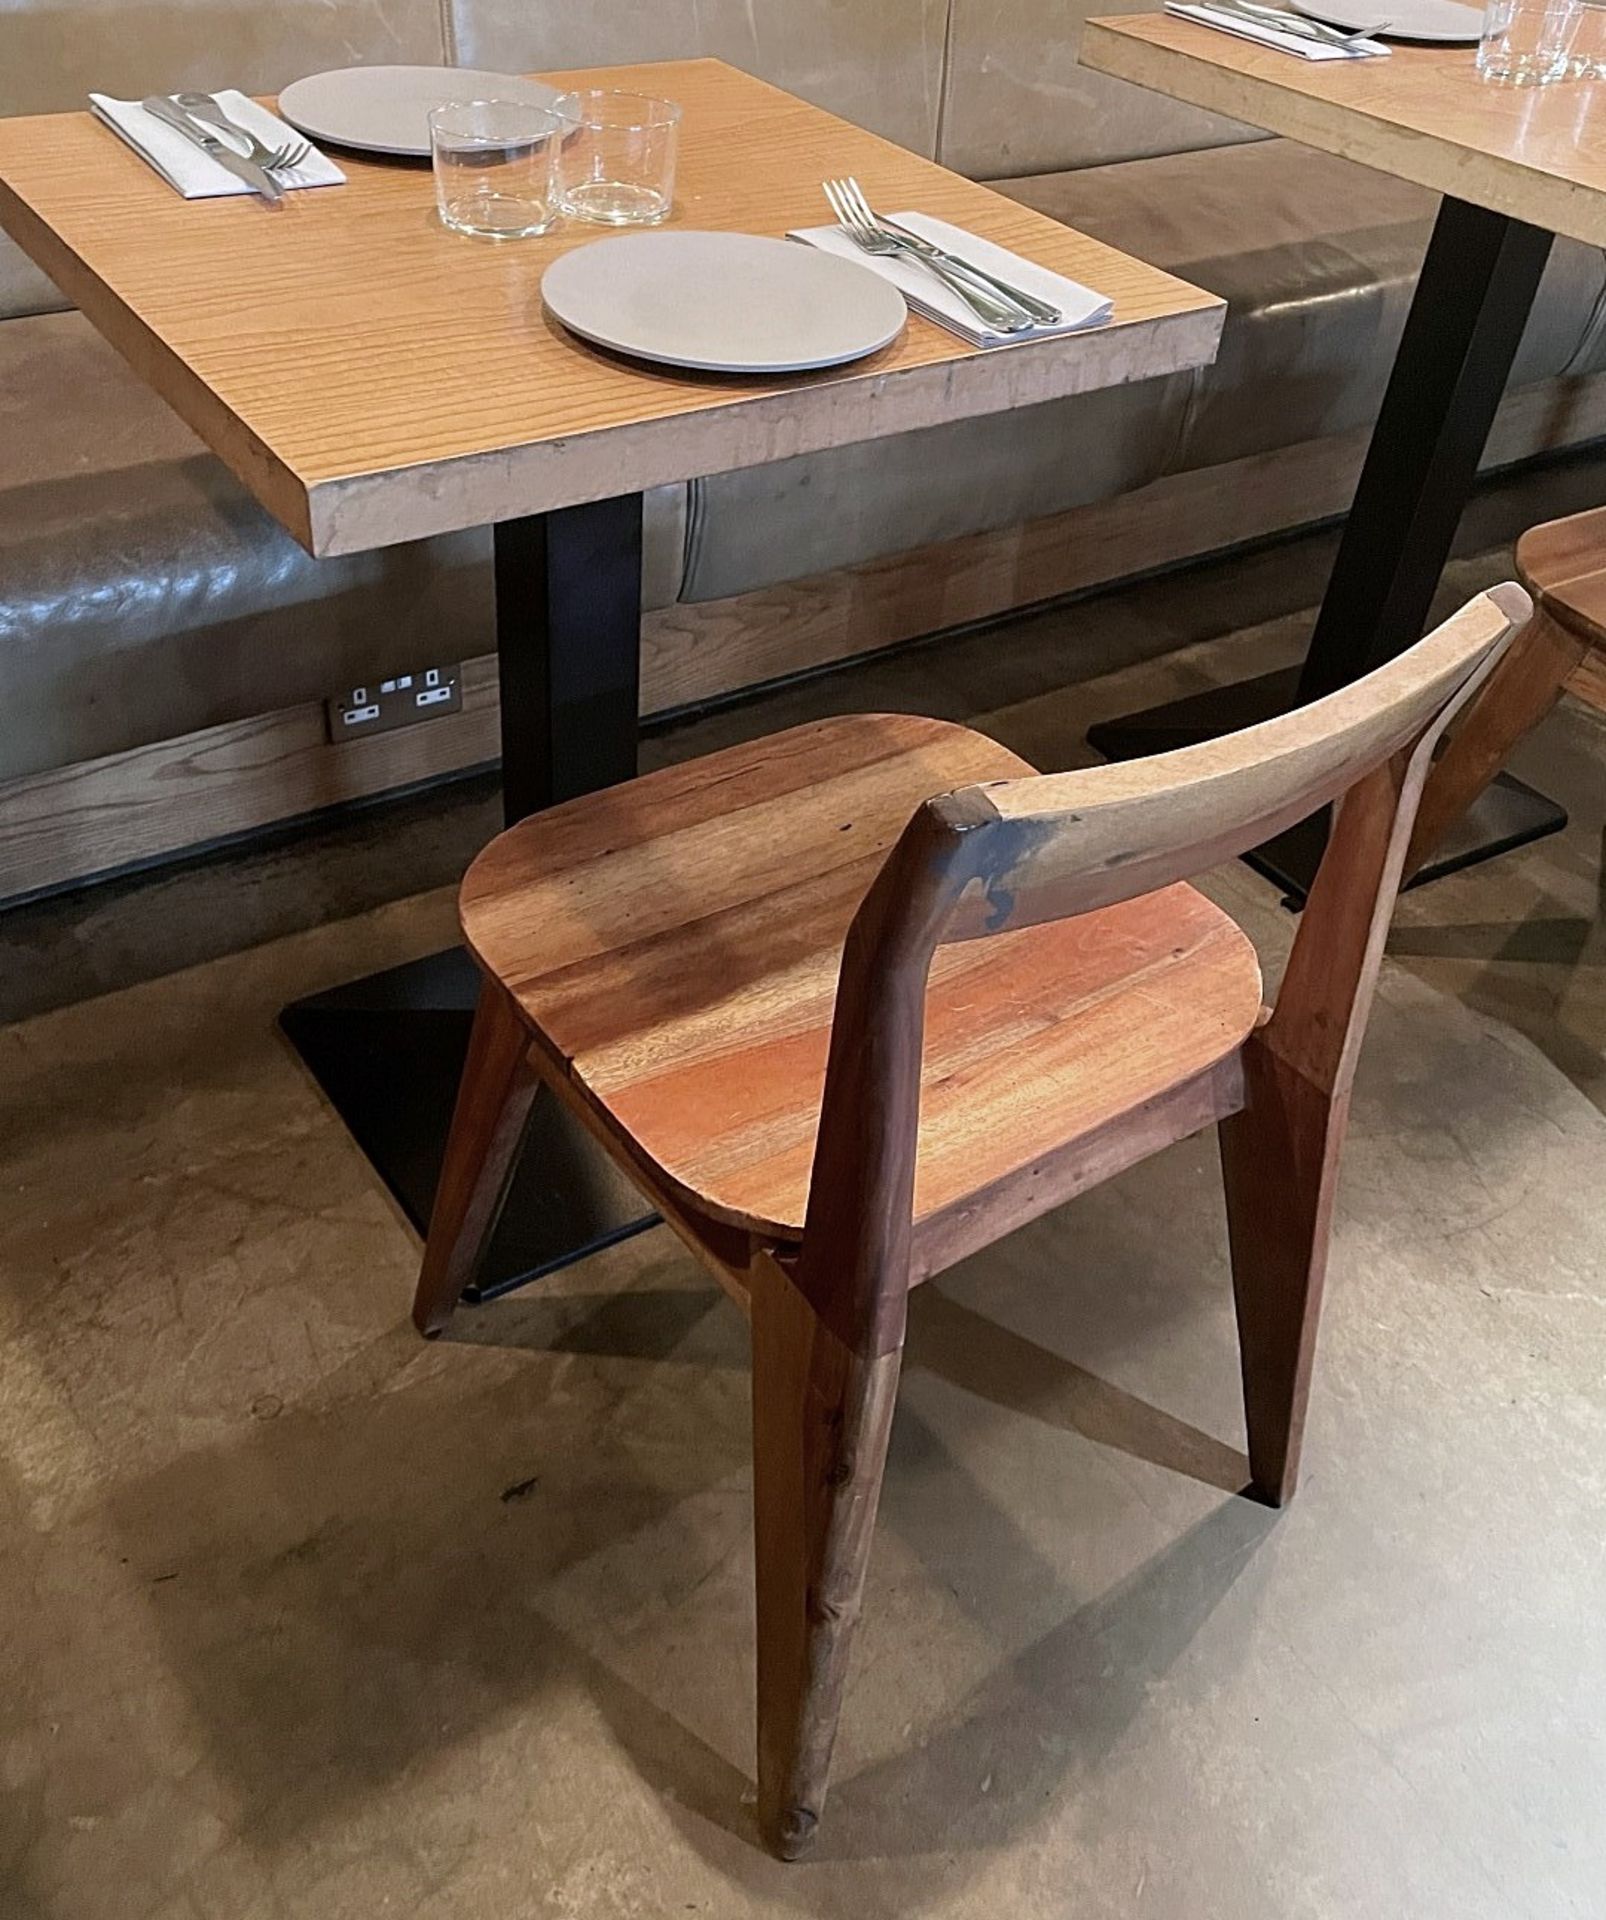 10 x Solid Wood Bistro Dining Chairs - Ref: MAN141 - CL677 - Location: London W1FThis item is to - Image 6 of 10